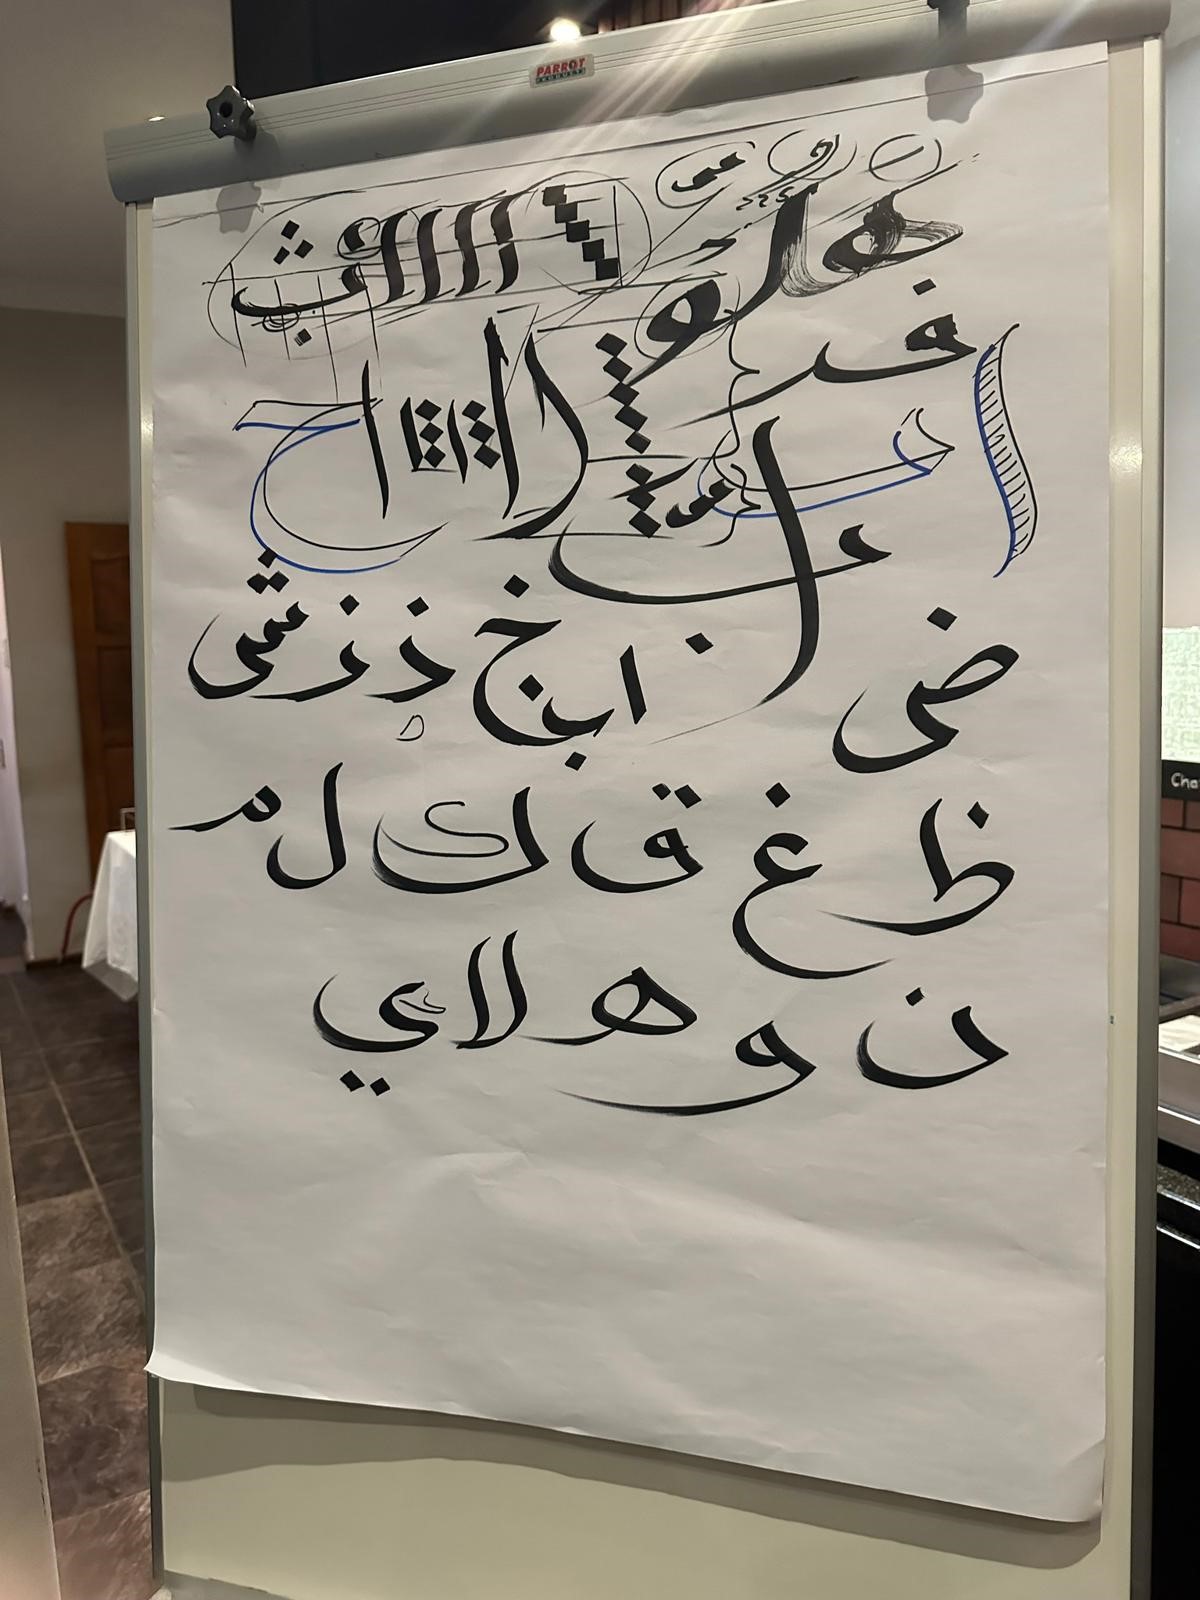 Photo of Calligraphy, taken during a lesson.